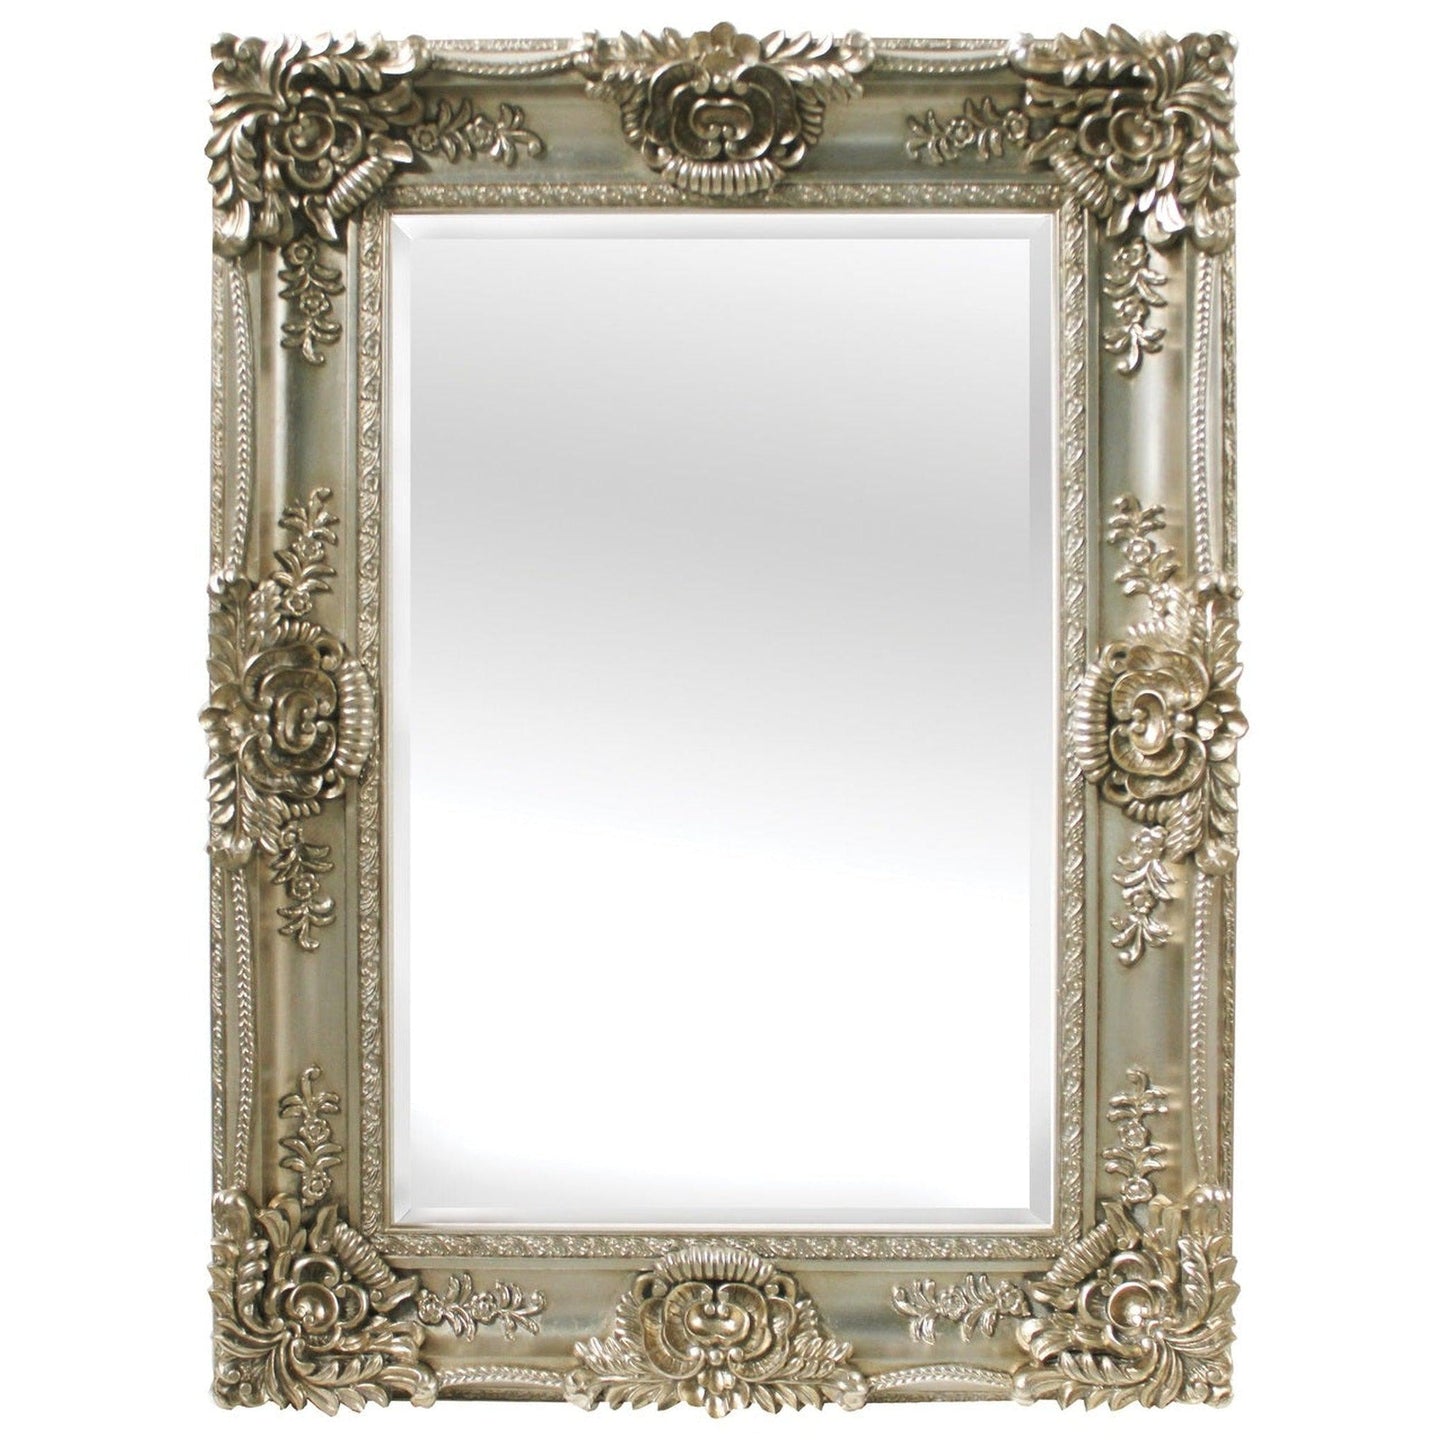 SBC Decor Mayfair Large 35" x 48" Wall-Mounted Full Length Wood Frame Dresser Wall Mirror In Champagne Gold Finish